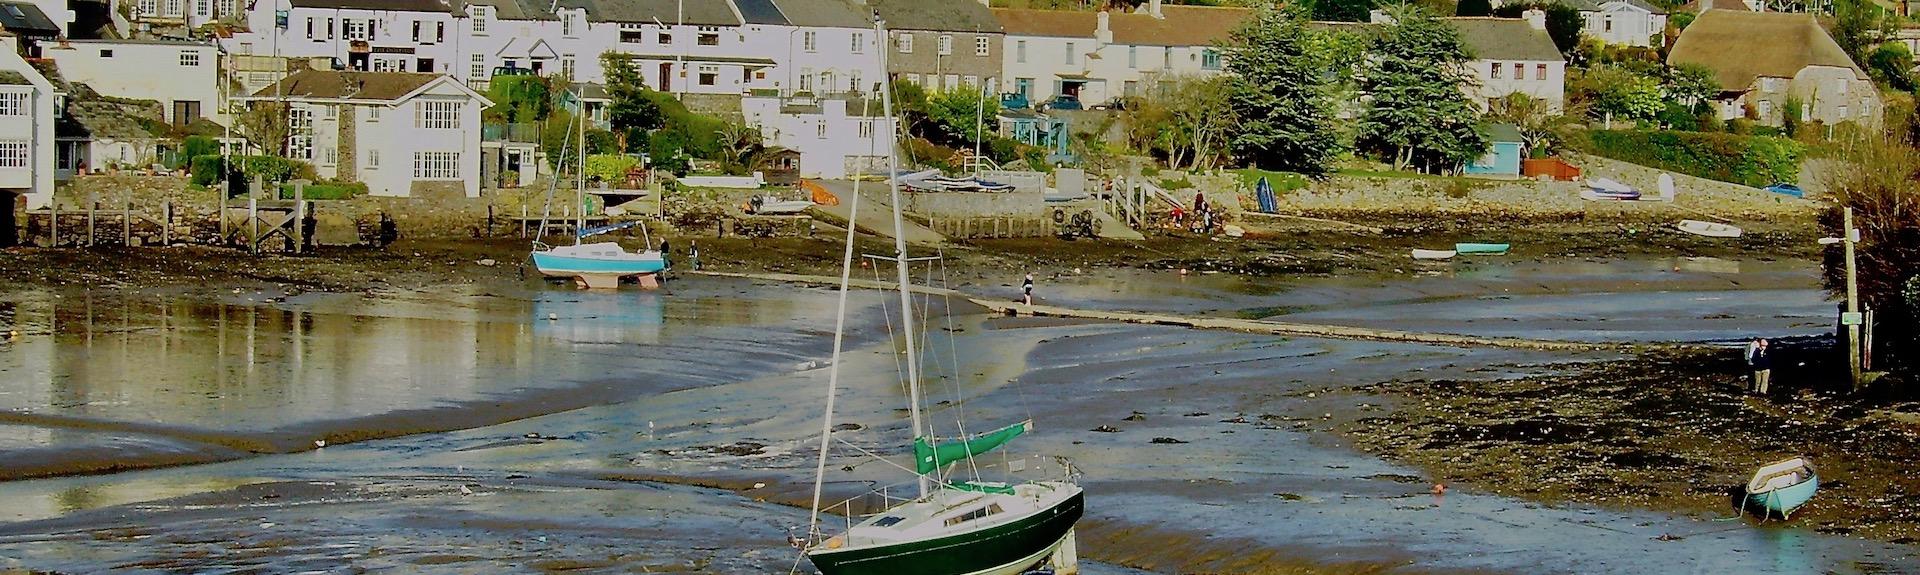 The pretty waterside village of Noss Mayo on the Yealm Estuary in South Devon.